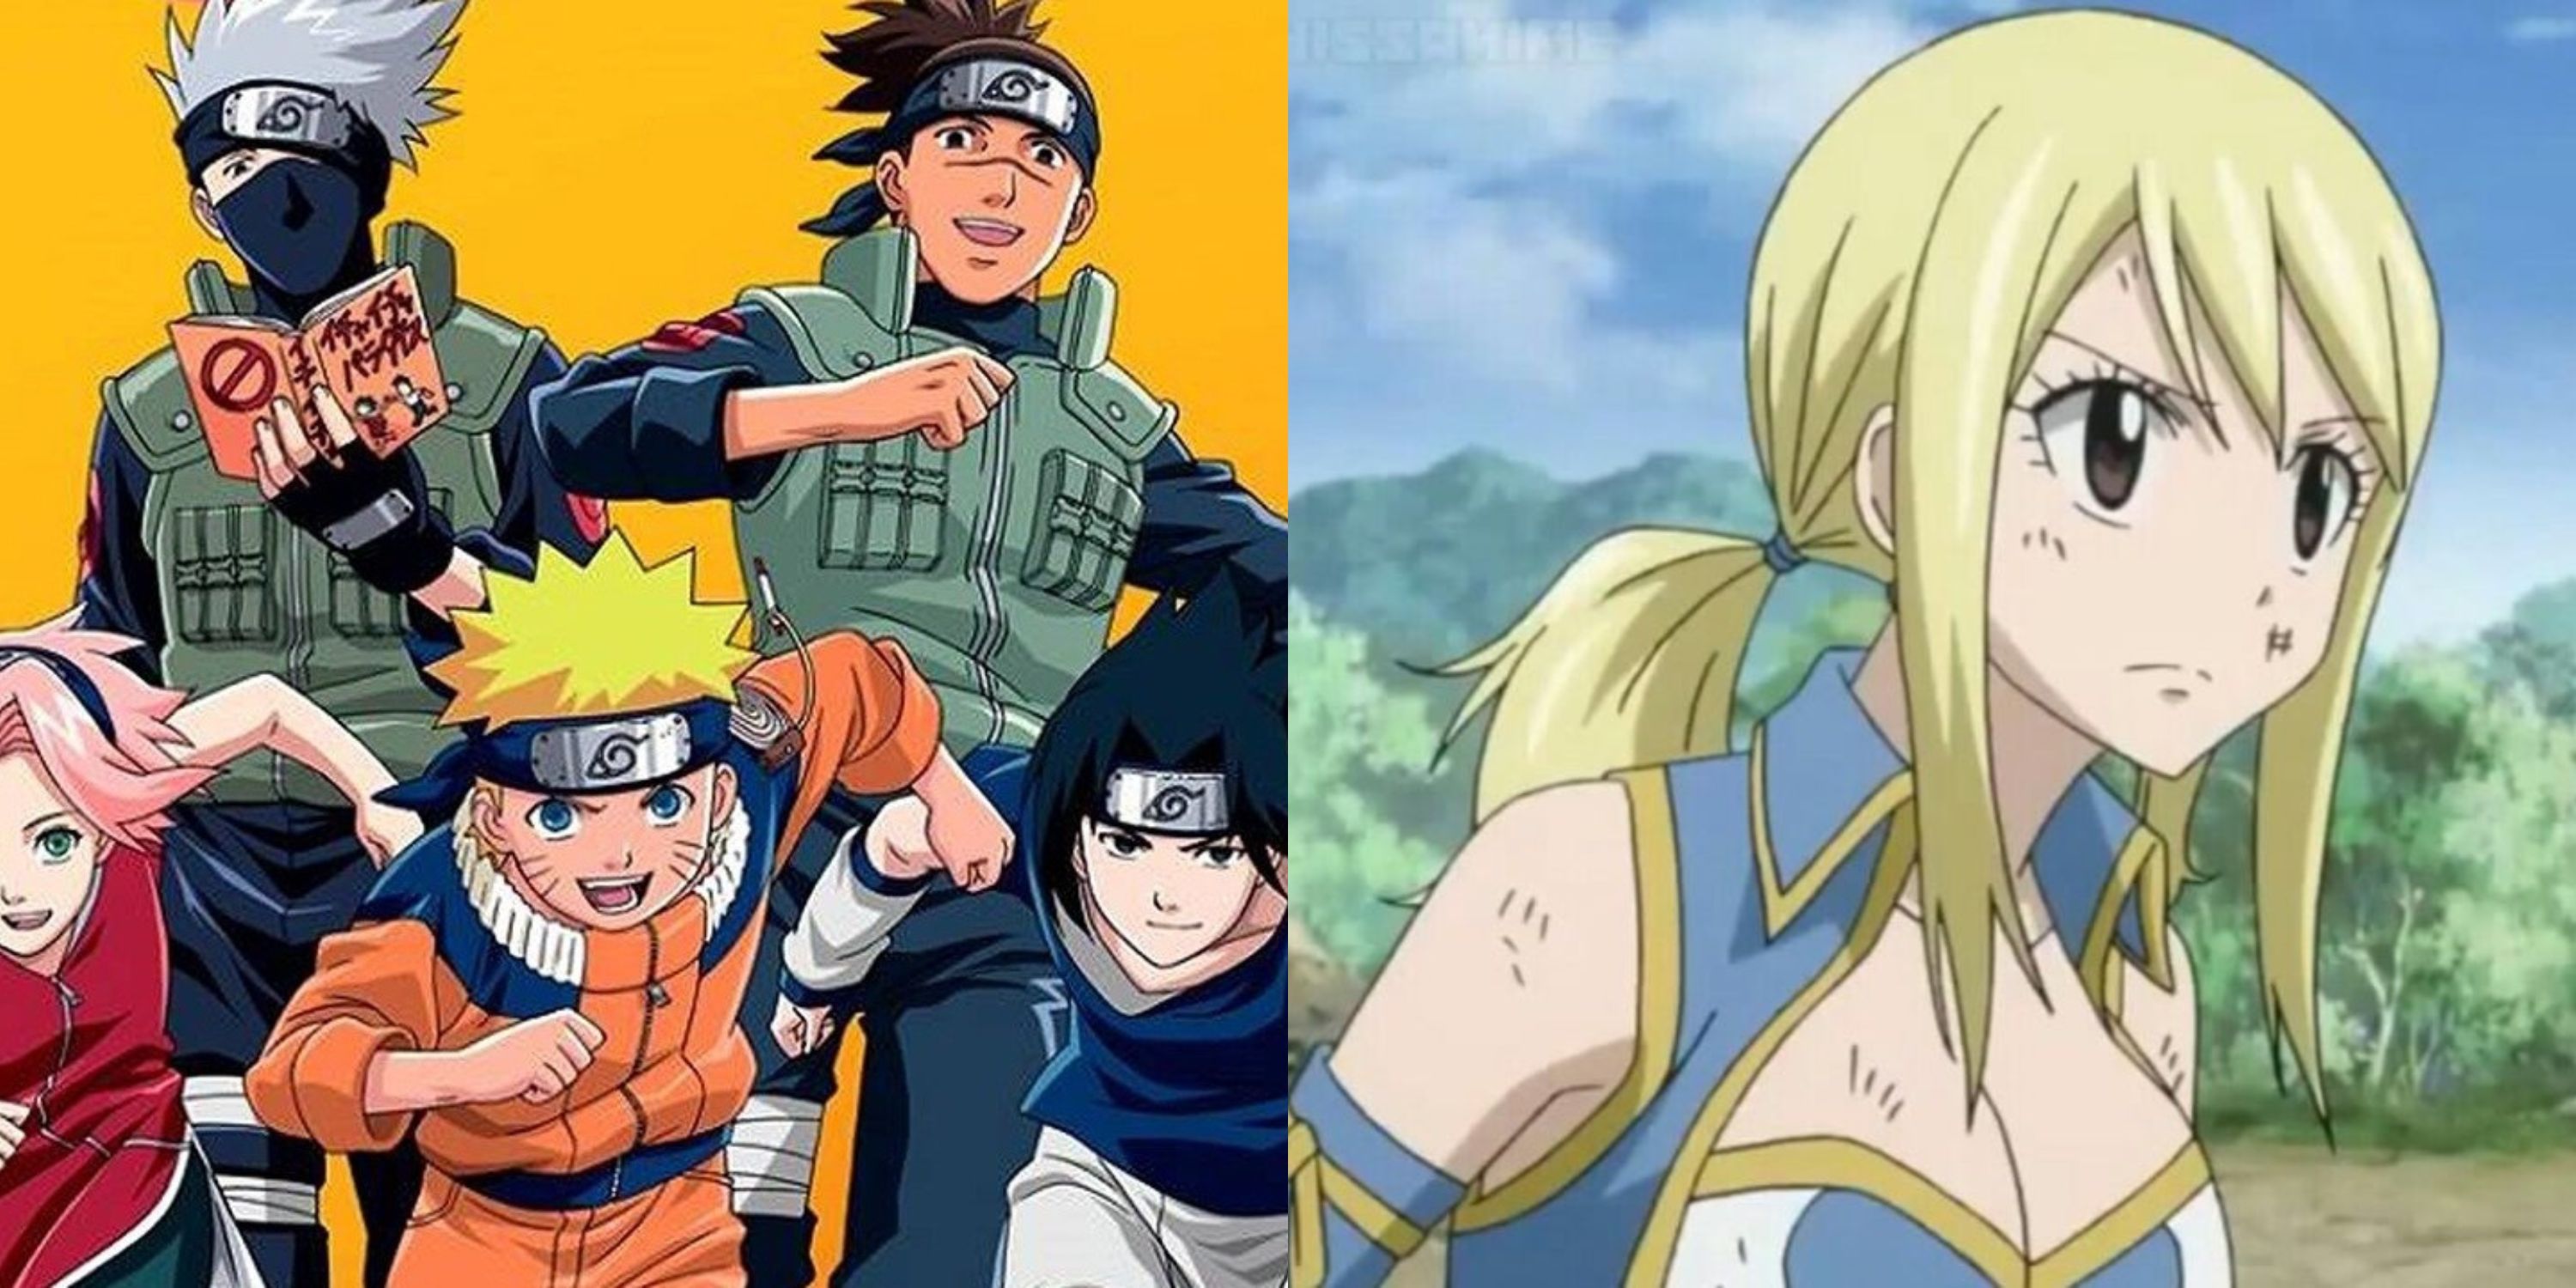 Featured image split a poster for the original Naruto series and a scene from Fairy Tail